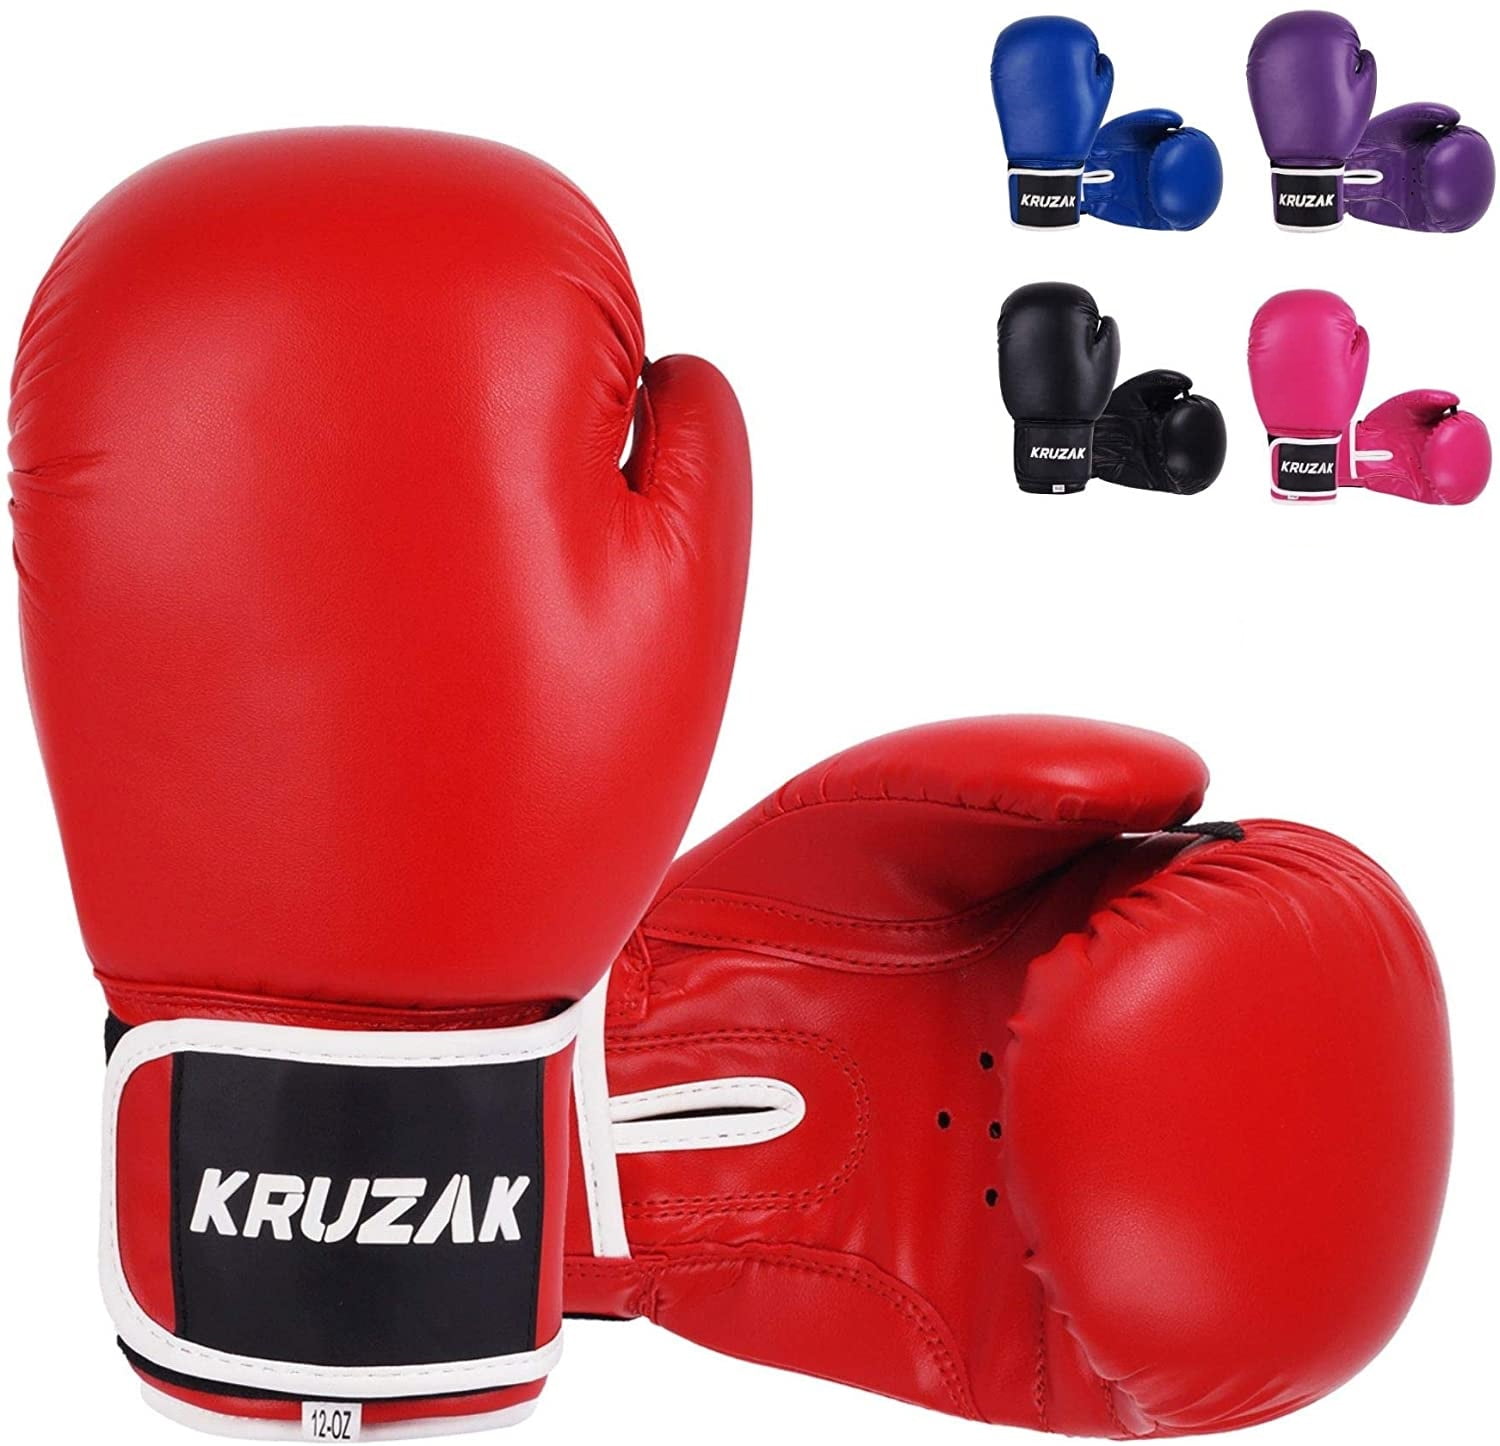 Leather Focus Pads Martial Arts MMA Boxing Mitts Punch Pad Training Gloves 